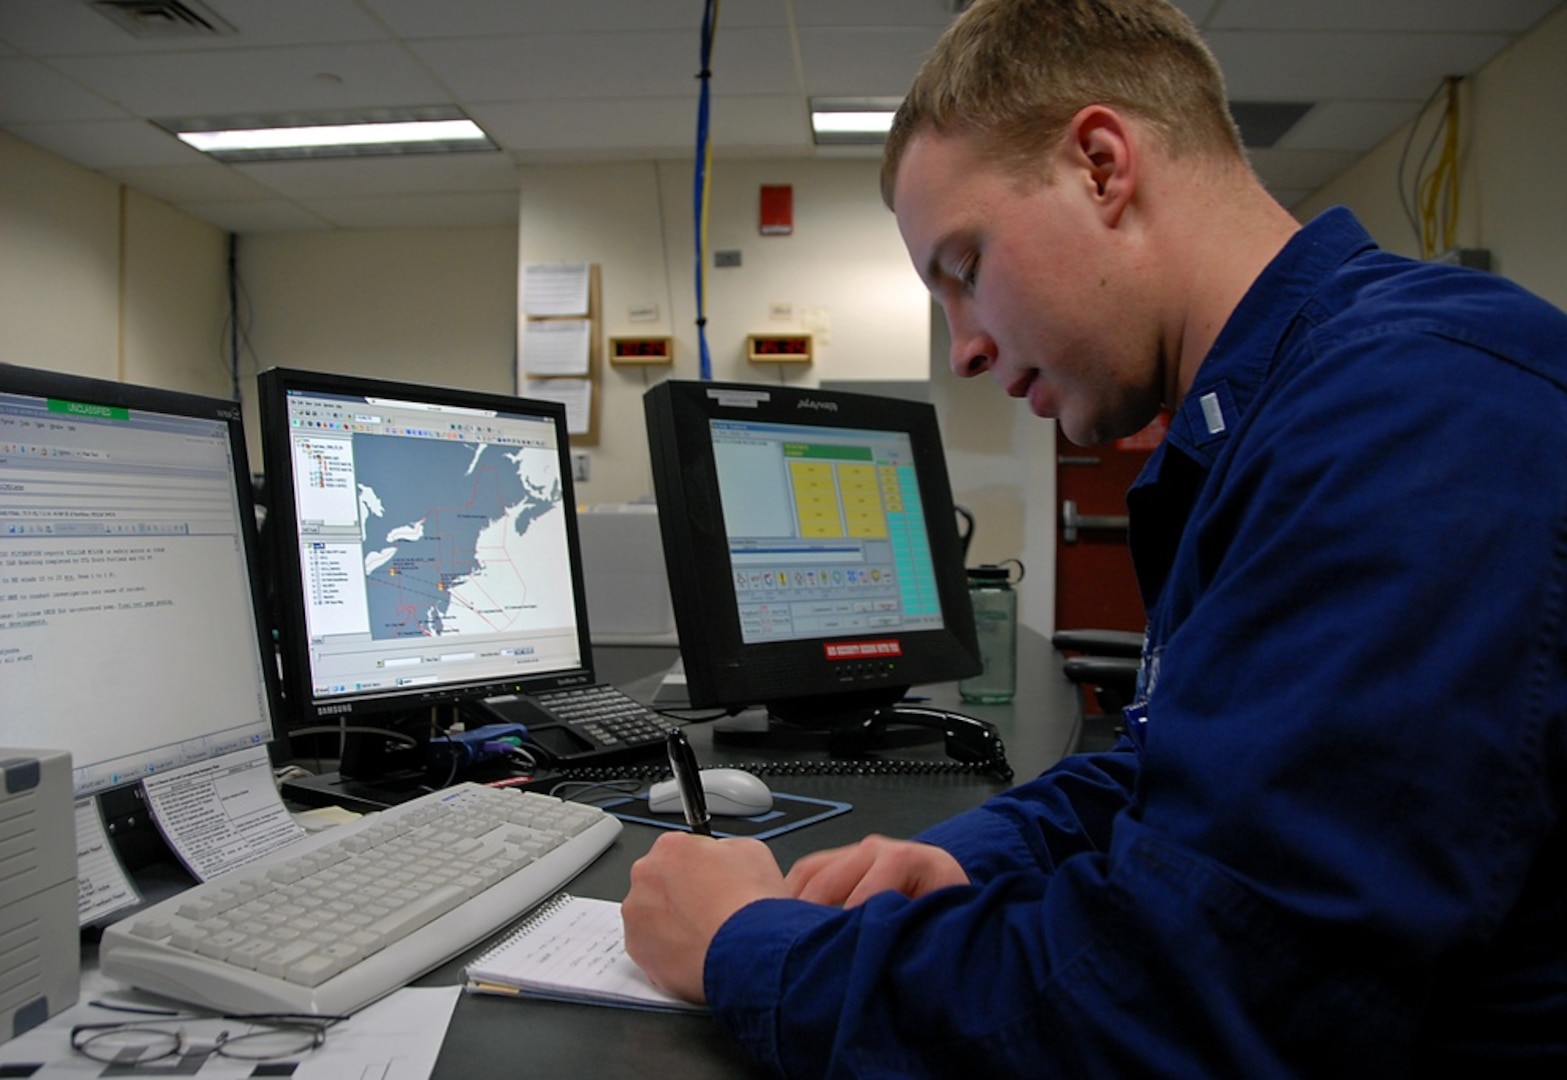 Lt. j.g. Andrew Madjeska gathers information during a routine twelve-hour watch period in the Coast Guard First District Command Center here Wednesday, March 5, 2008. Madjeska is one of three watch standers in the command center responsible for coordinating search and rescue operations and daily missions off the coast of Maine down to New Jersey. (Coast Guard photo/Lauren Downs)